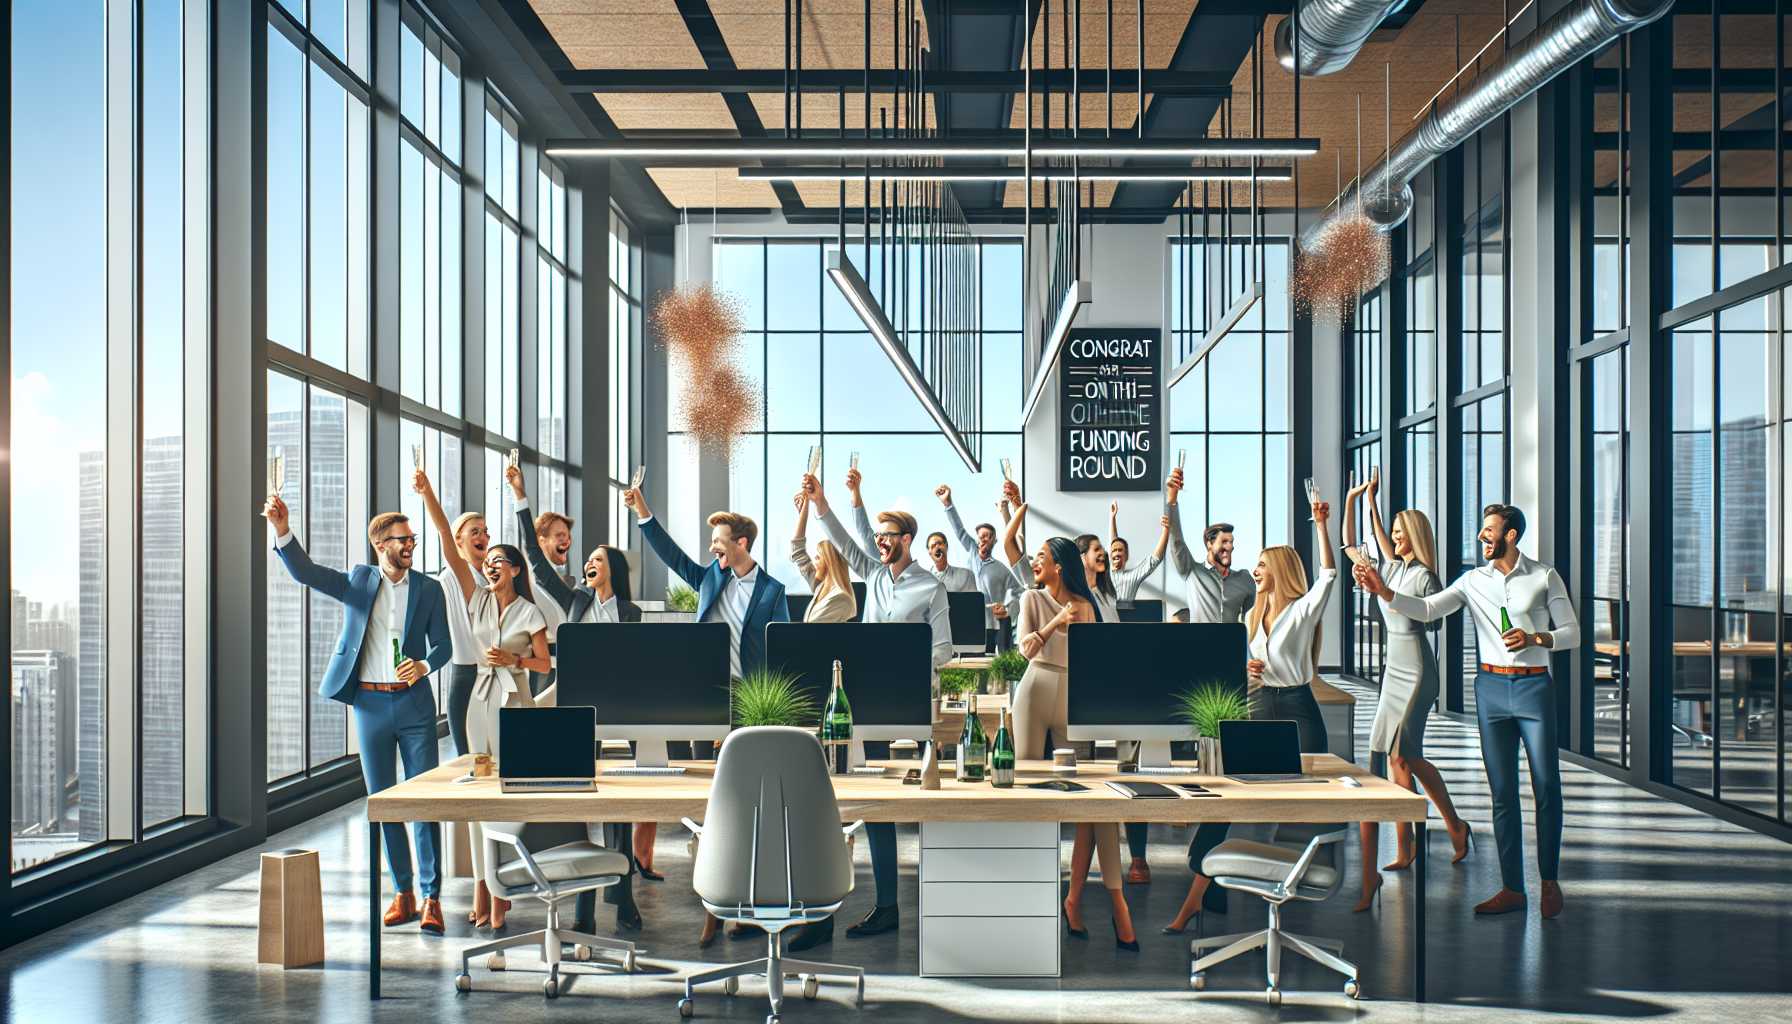 a modern office with happy employees celebrating funding round